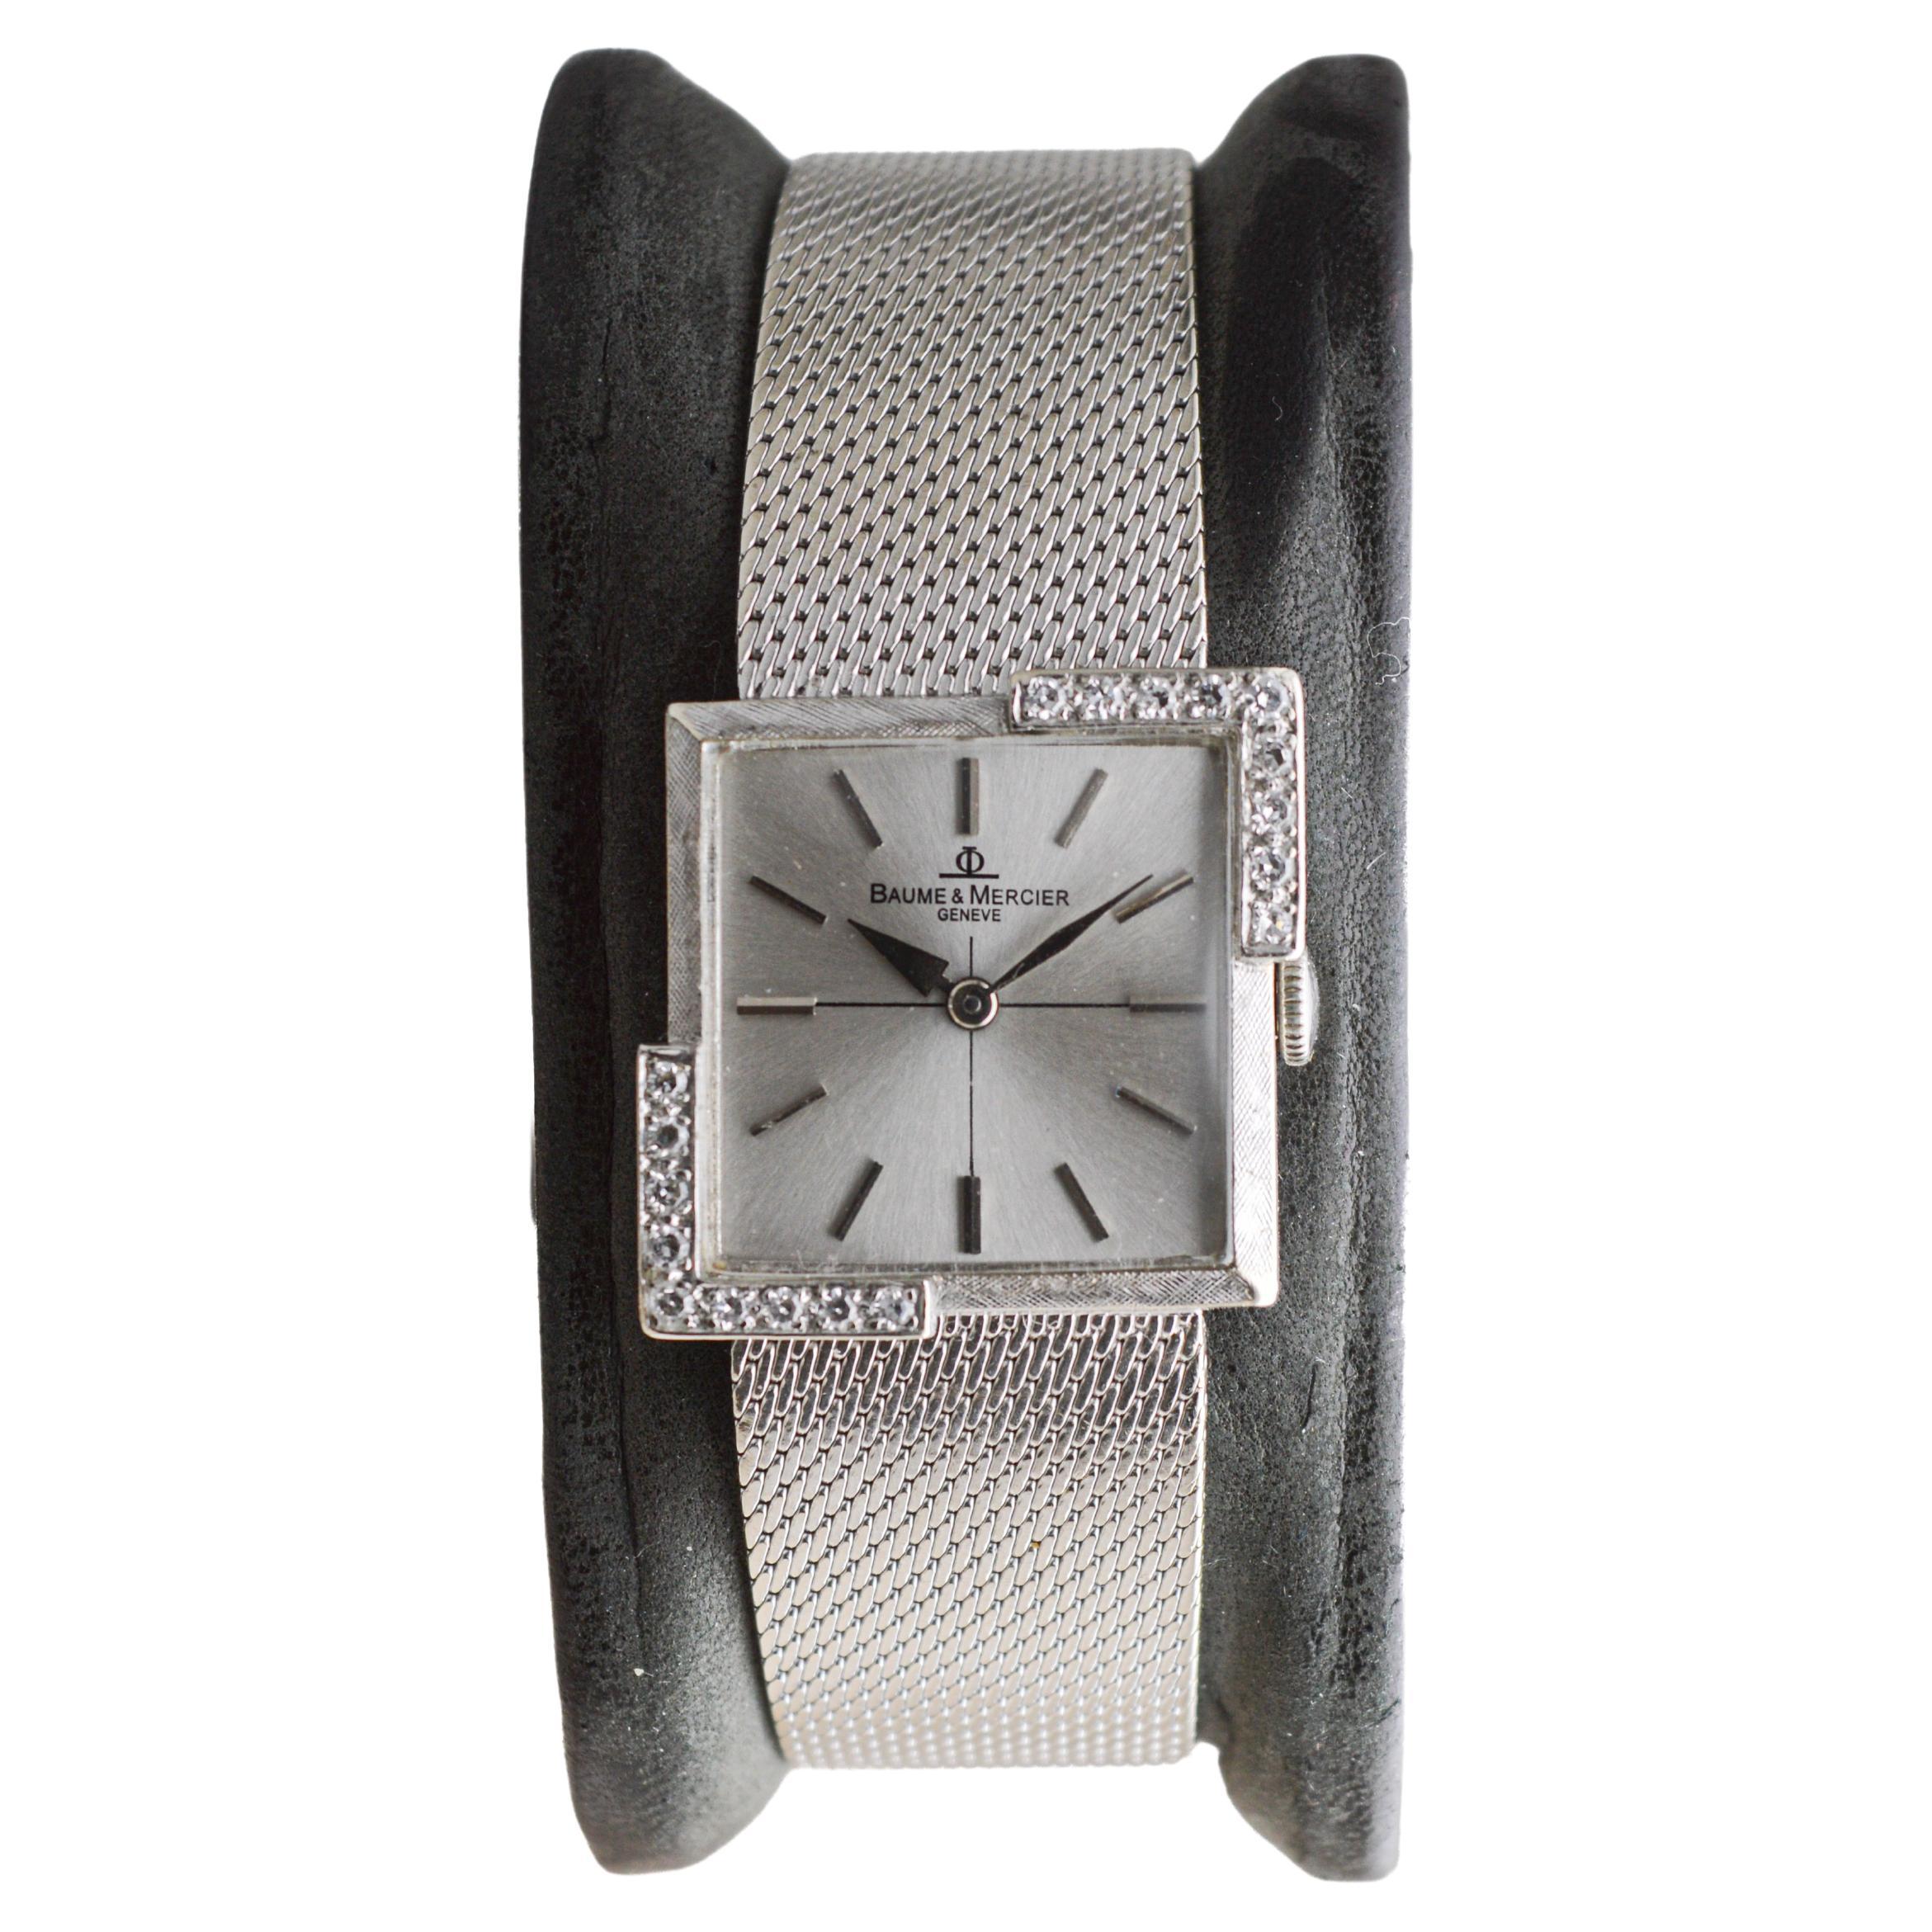 FACTORY / HOUSE: Baume Mercier Watch Company
STYLE / REFERENCE: Bracelet  Style Dress Watch
METAL / MATERIAL: 14Kt. Solid White Gold 
CIRCA / YEAR: 1960's 
DIMENSIONS / SIZE: Length 23mm X Width 23mm
MOVEMENT / CALIBER: Manual Winding / 17 Jewels /